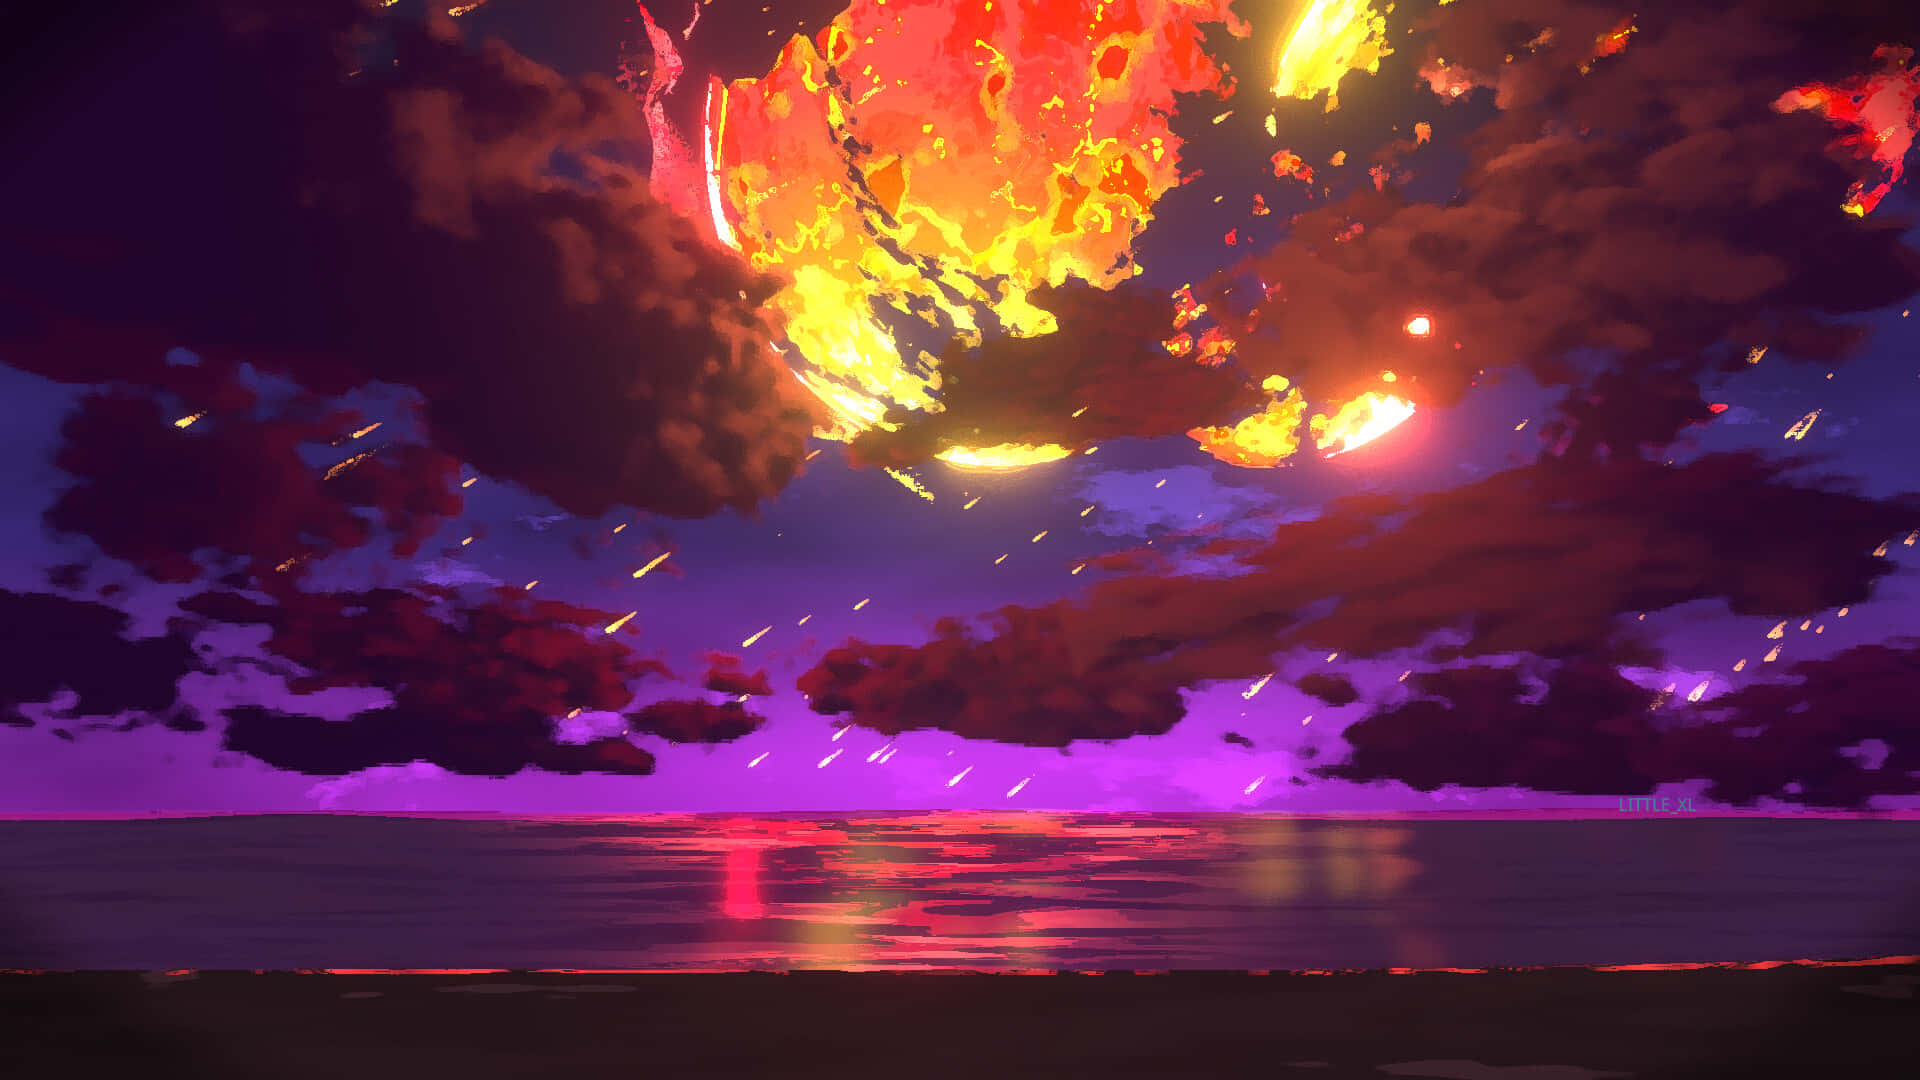 A Purple And Orange Sky With A Fire In The Background Wallpaper